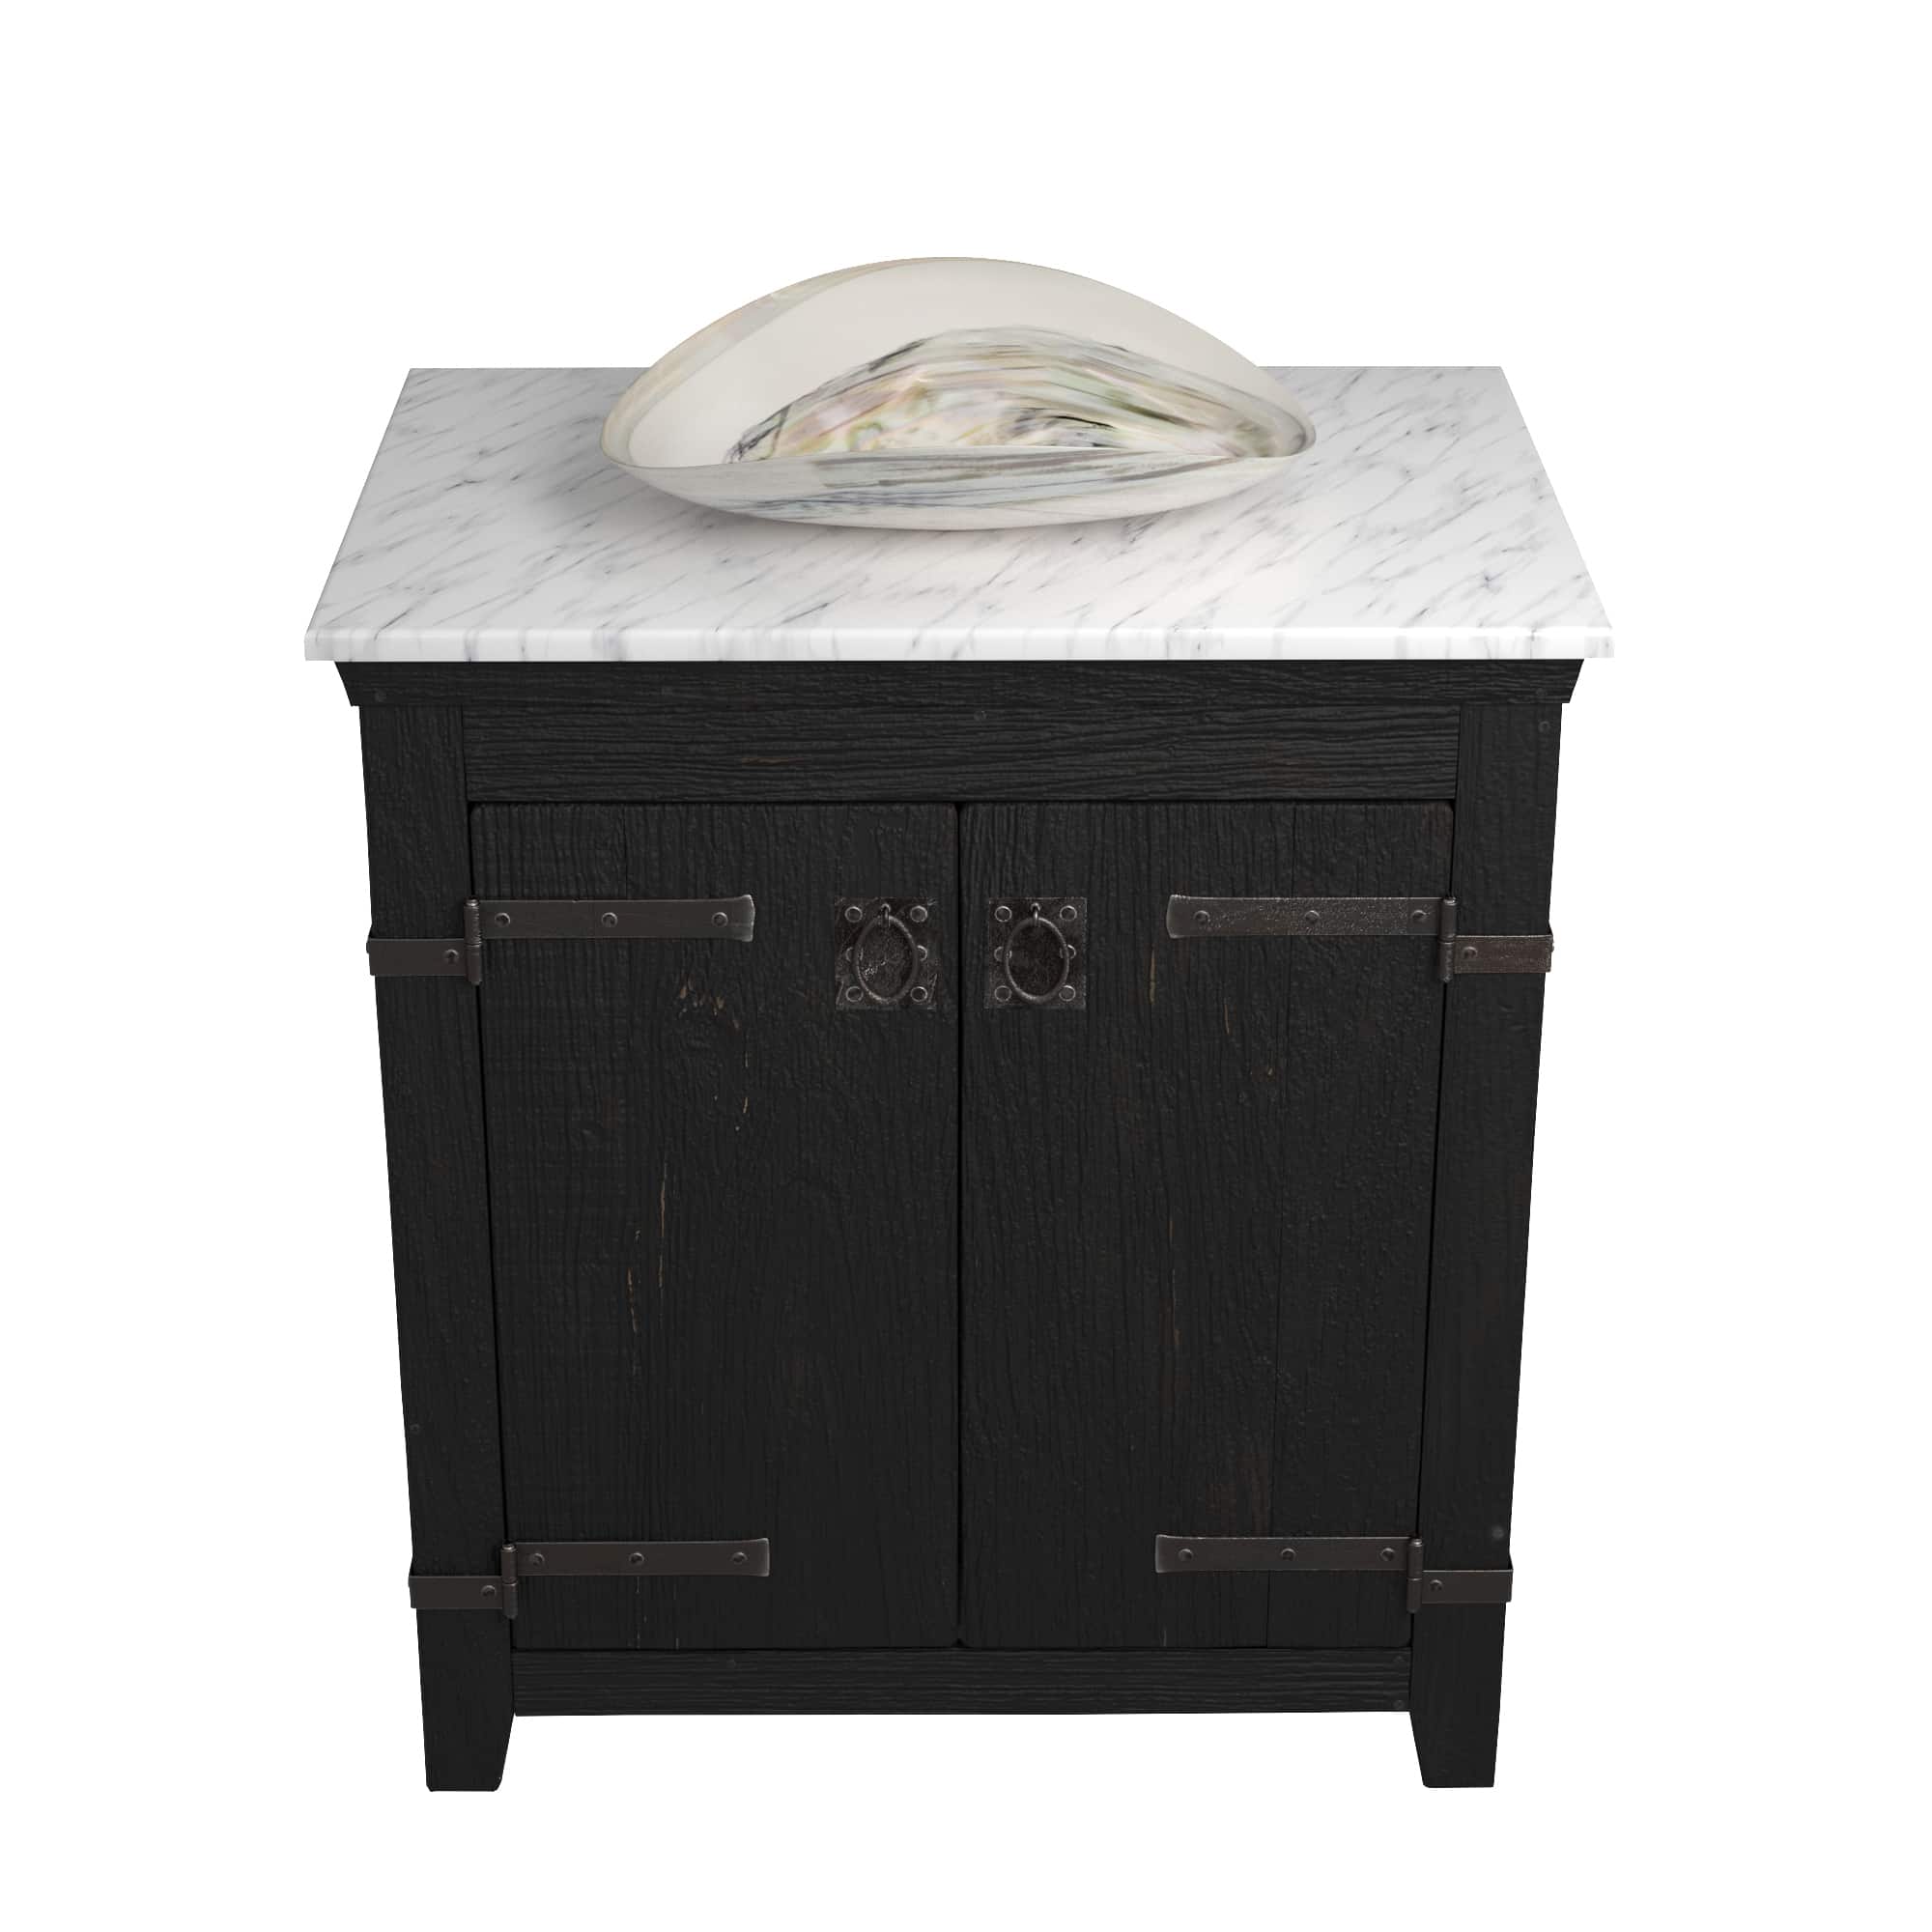 Native Trails 30" Americana Vanity in Anvil with Carrara Marble Top and Sorrento in Abalone, Single Faucet Hole, BND30-VB-CT-MG-093